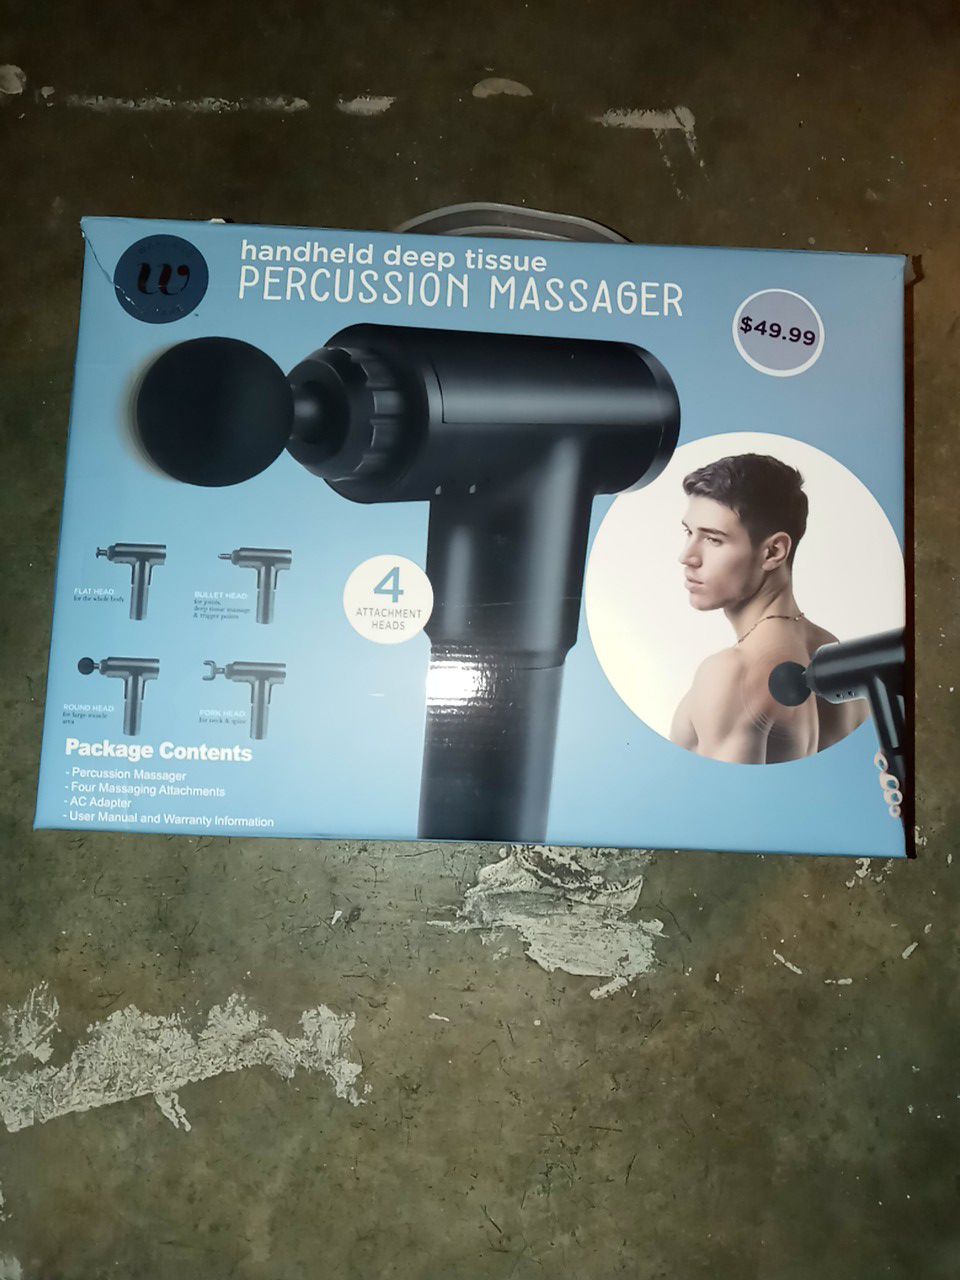 Percussion massager